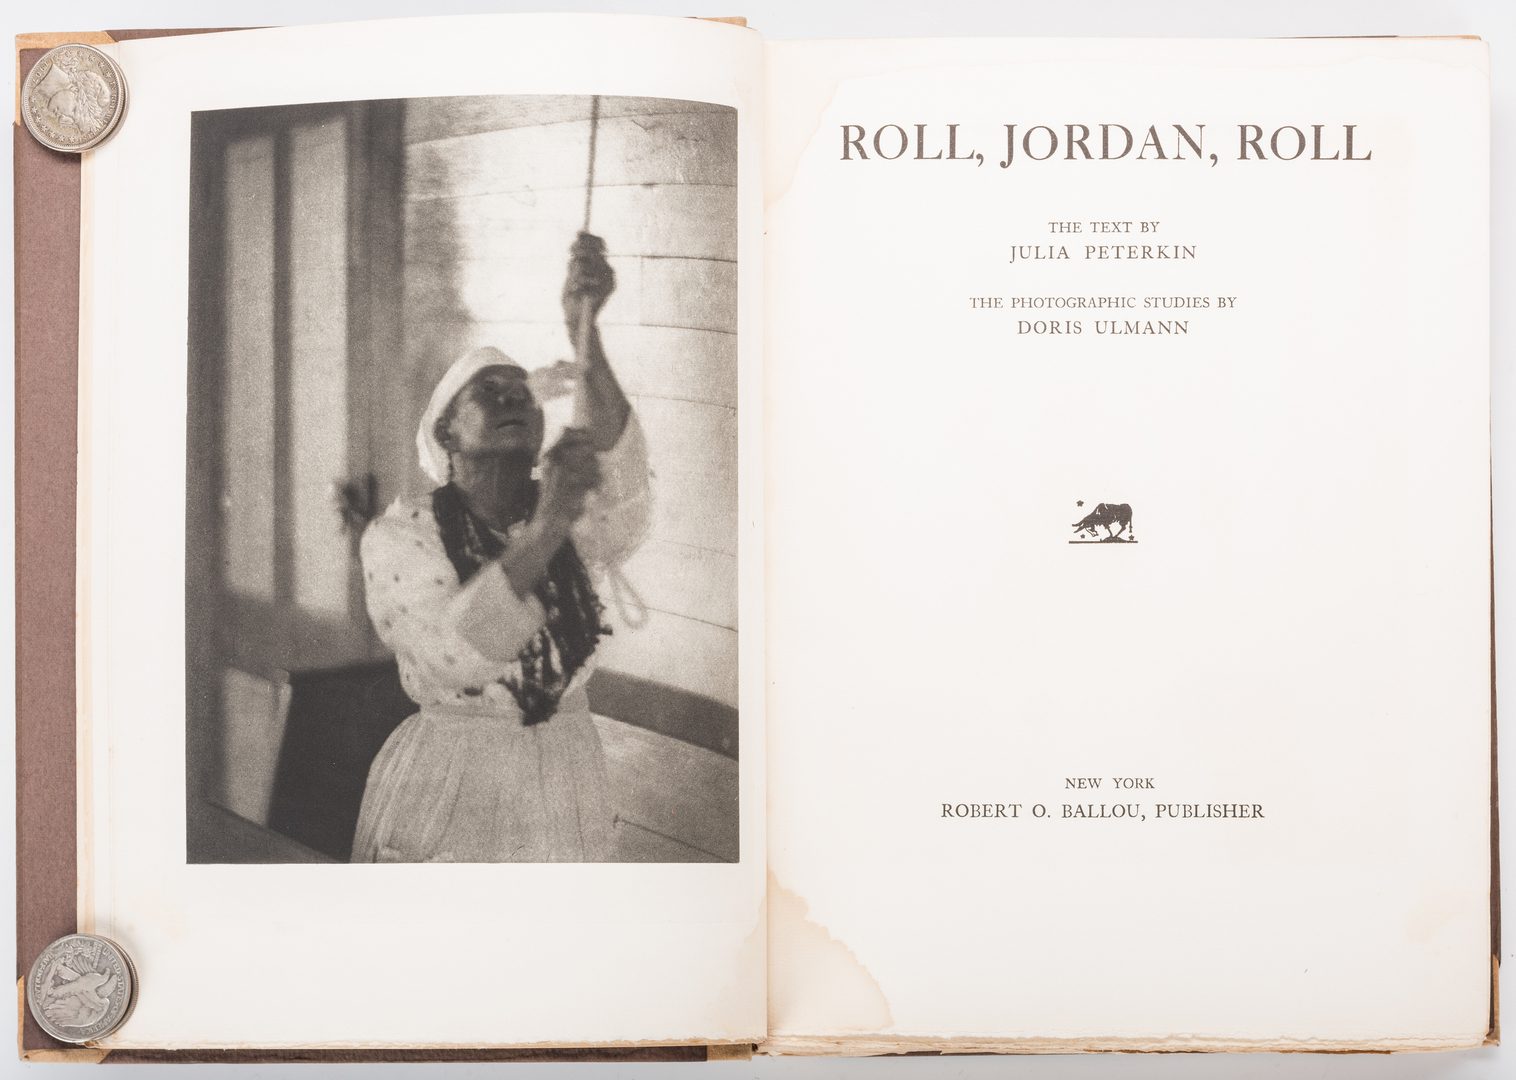 Lot 546: Roll Jordan Roll, Author Signed #74 of 350.